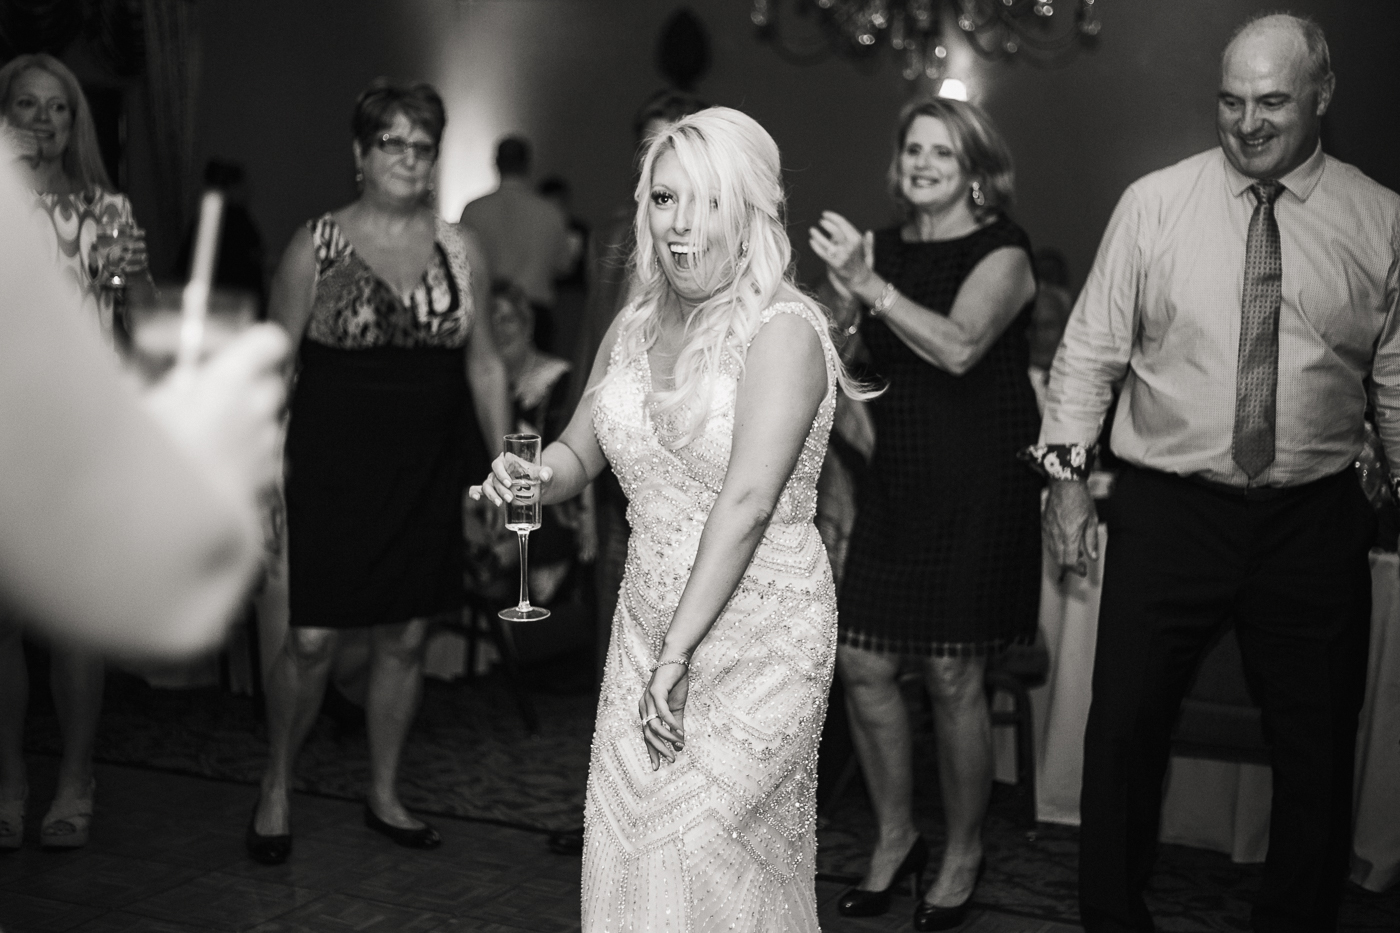 Canandaigua Wedding at the Inn on the Lake by Emi Rose Studio